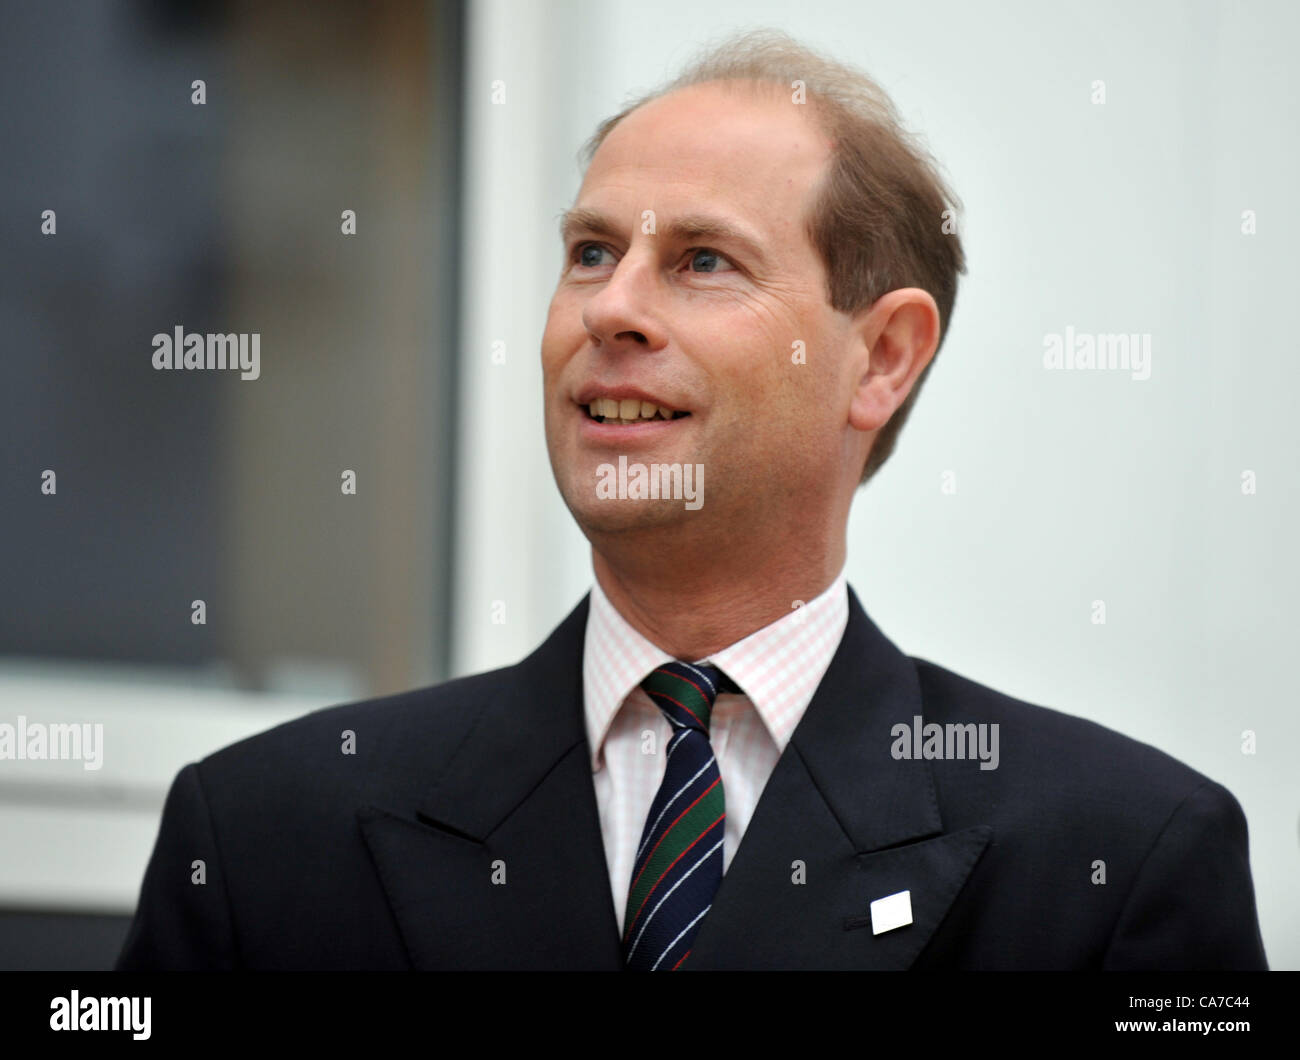 Prince Edward, Earl of Wessex, officially opens the new Budmouth College at Weymouth, Dorset, Britain. 21/06/2012 PICTURE BY: DORSET MEDIA SERVICE Stock Photo